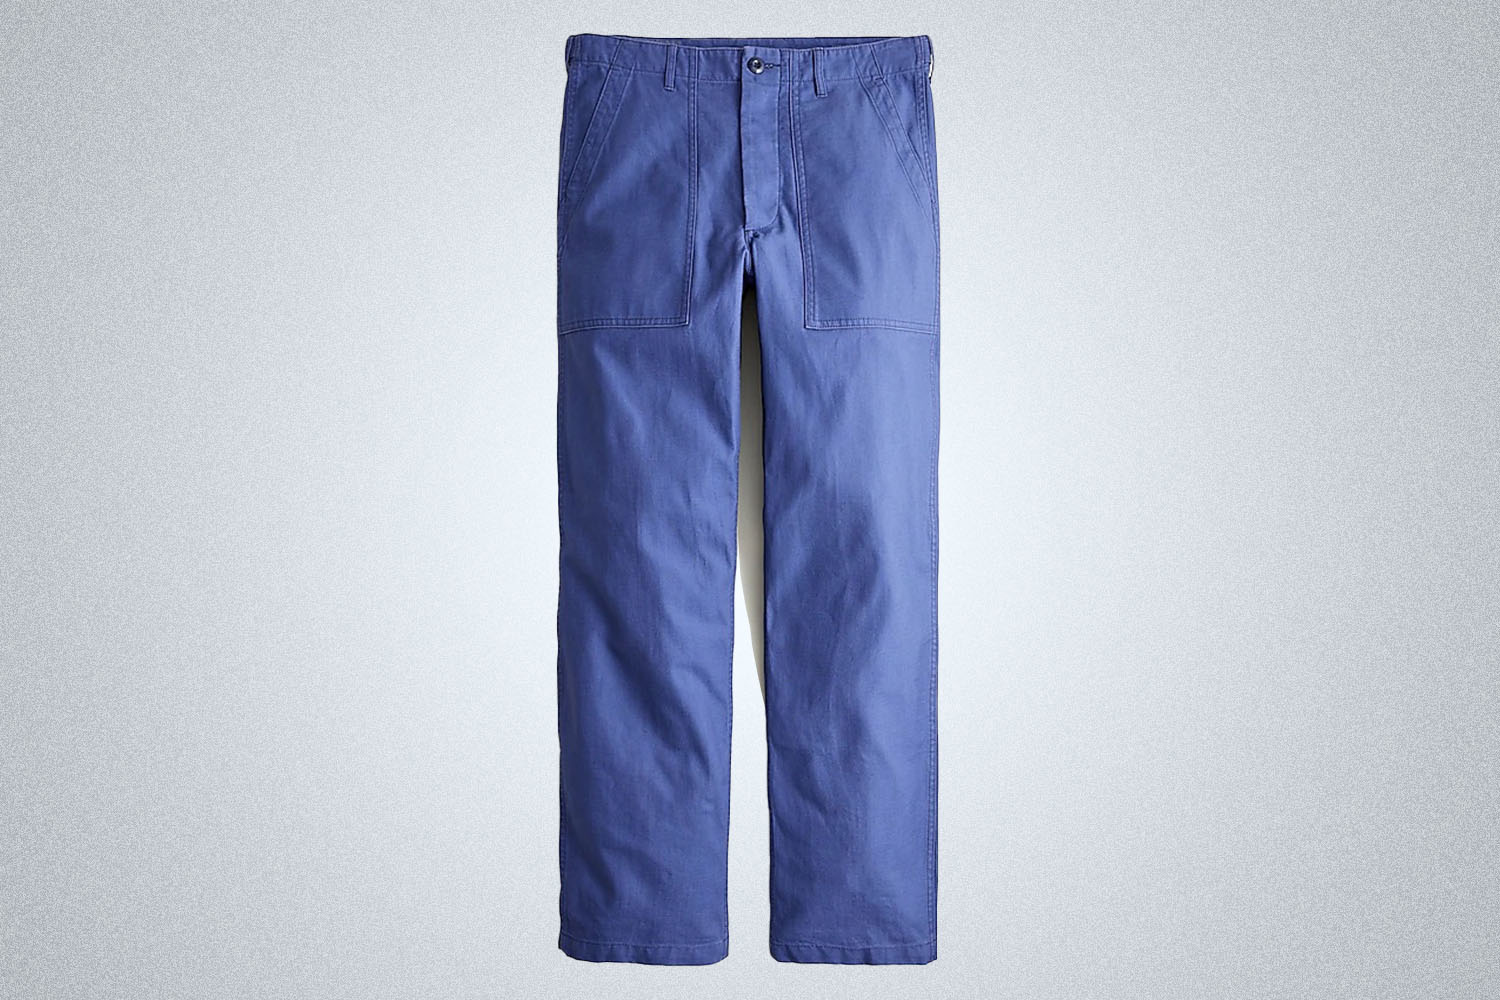 a pair of true blue camp pants from J.Crew on a grey background